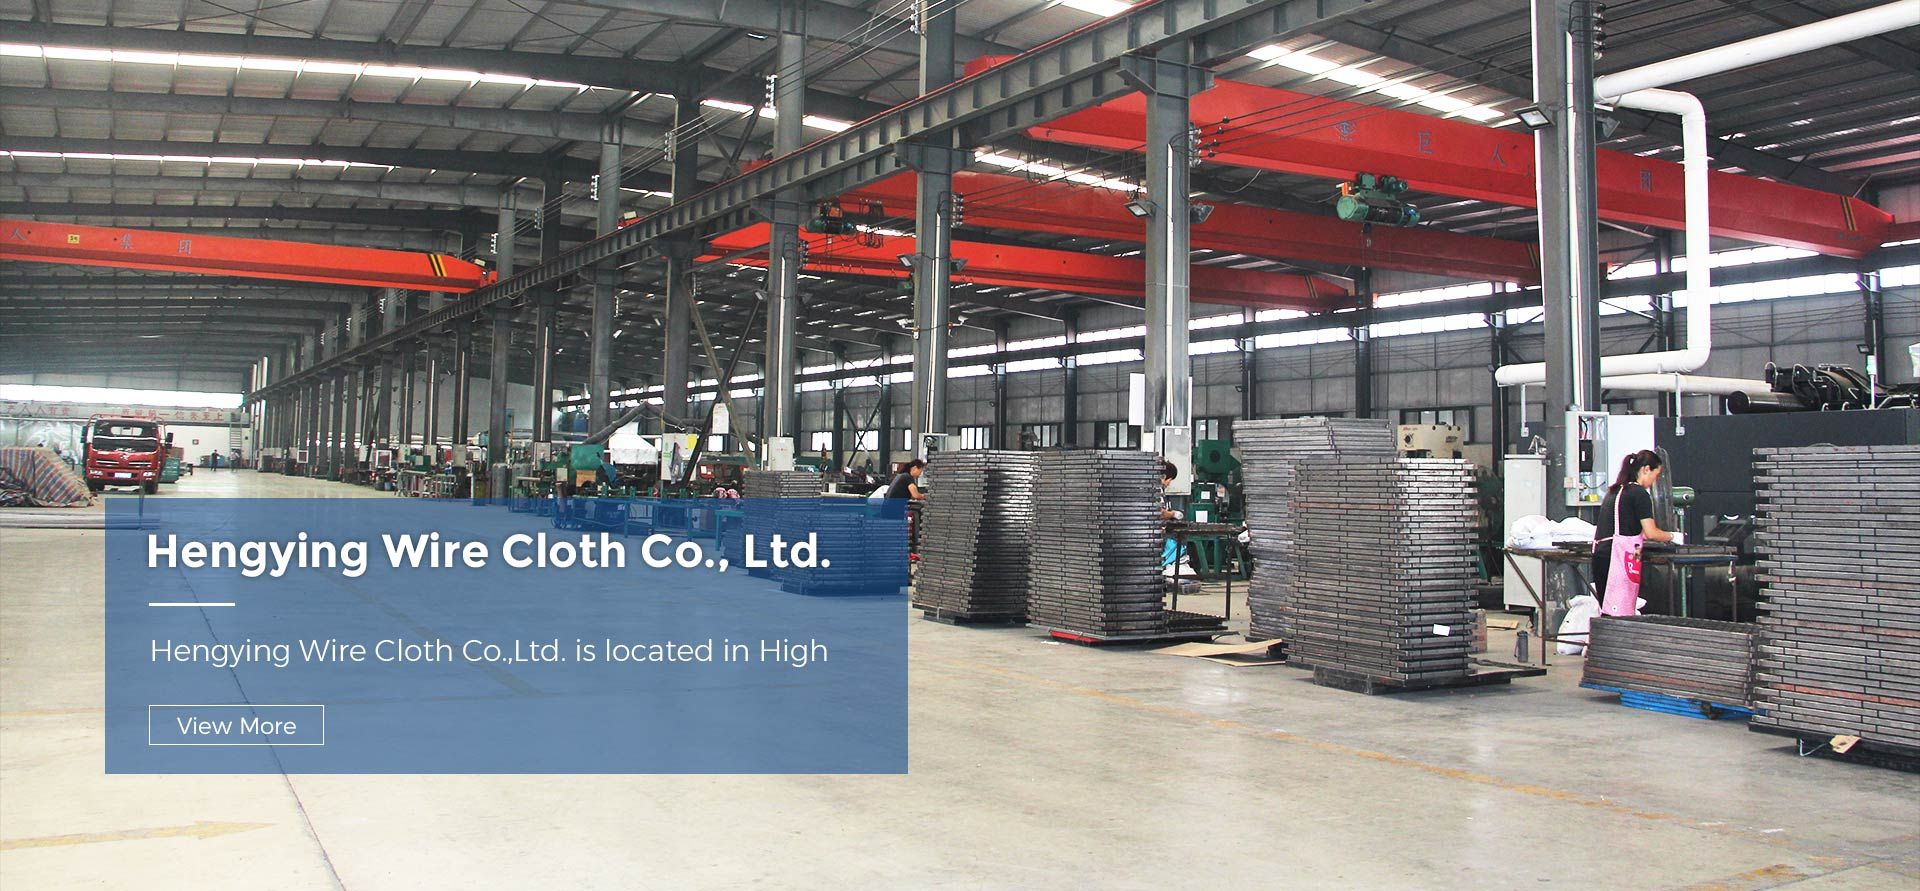 Hengying Wire Cloth Co., Ltd.